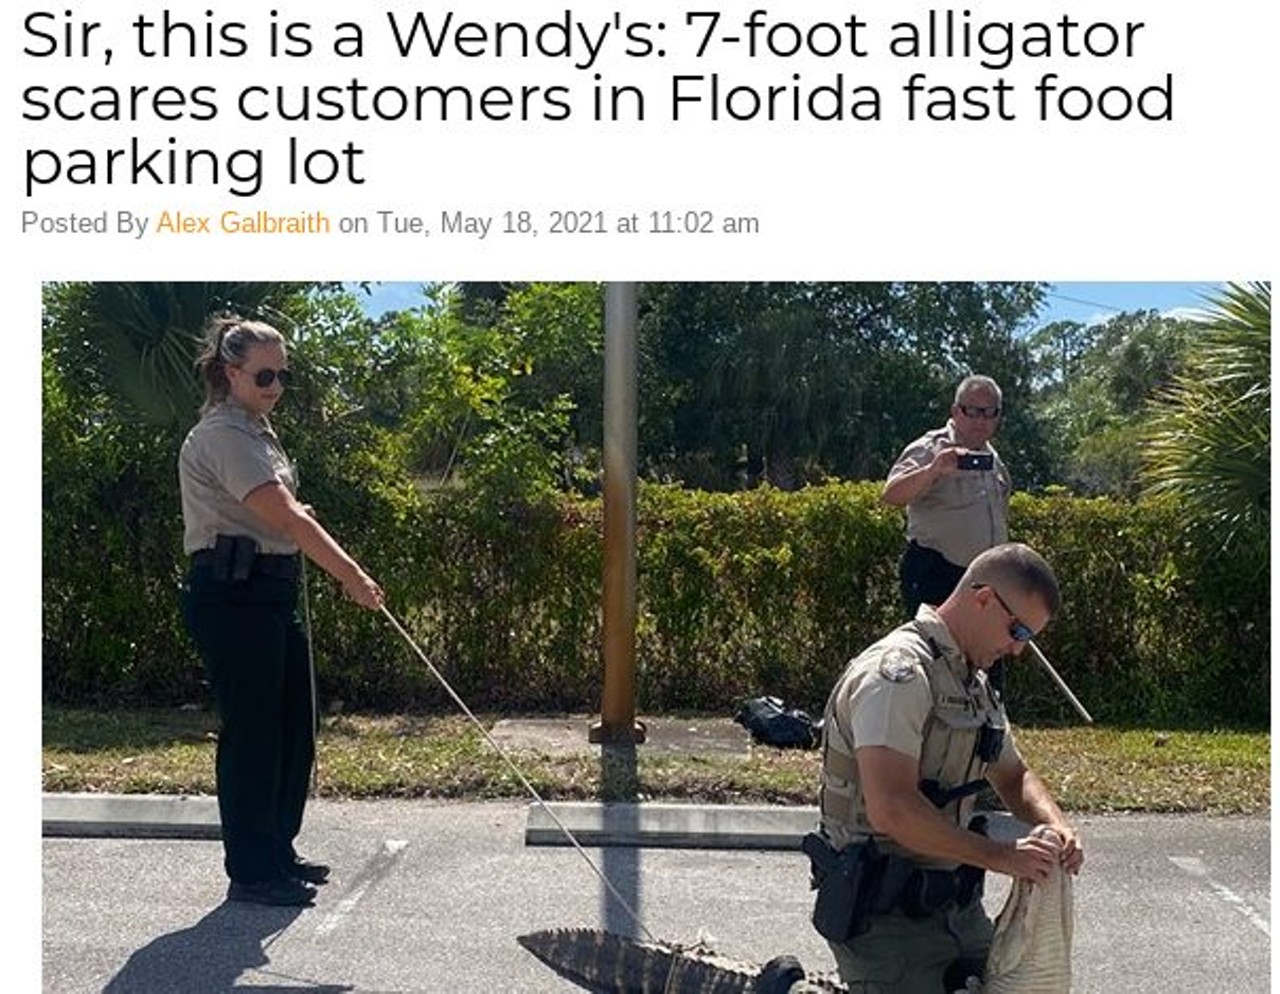 Sir, this is a Wendy's: 7-foot alligator scares customers in Florida fast food parking lot
